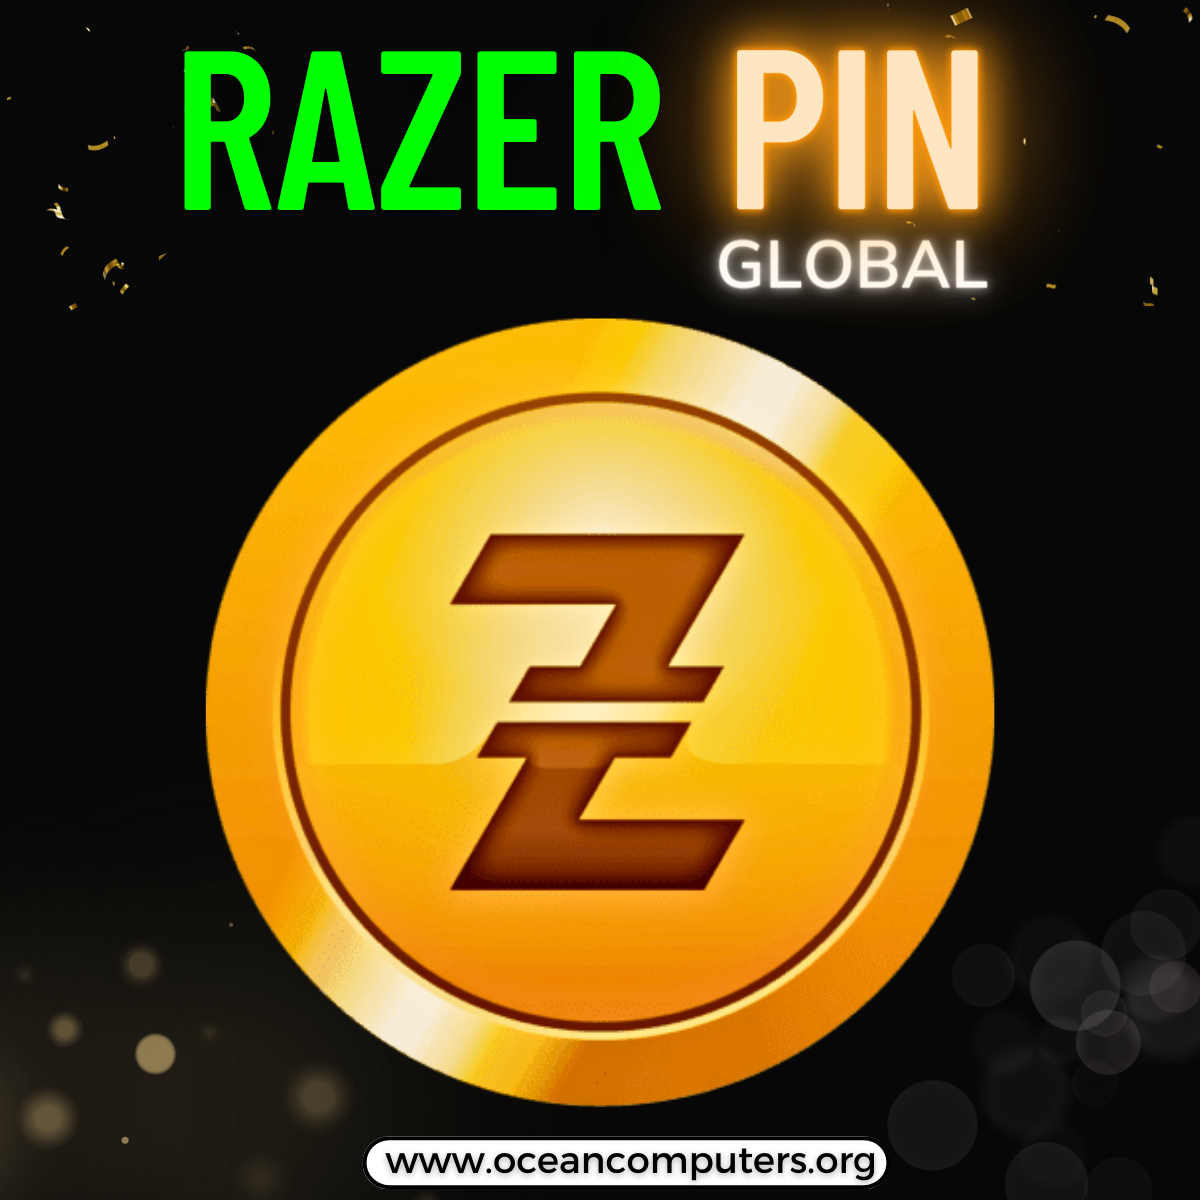 Razer Gold Topup And Recharge Global